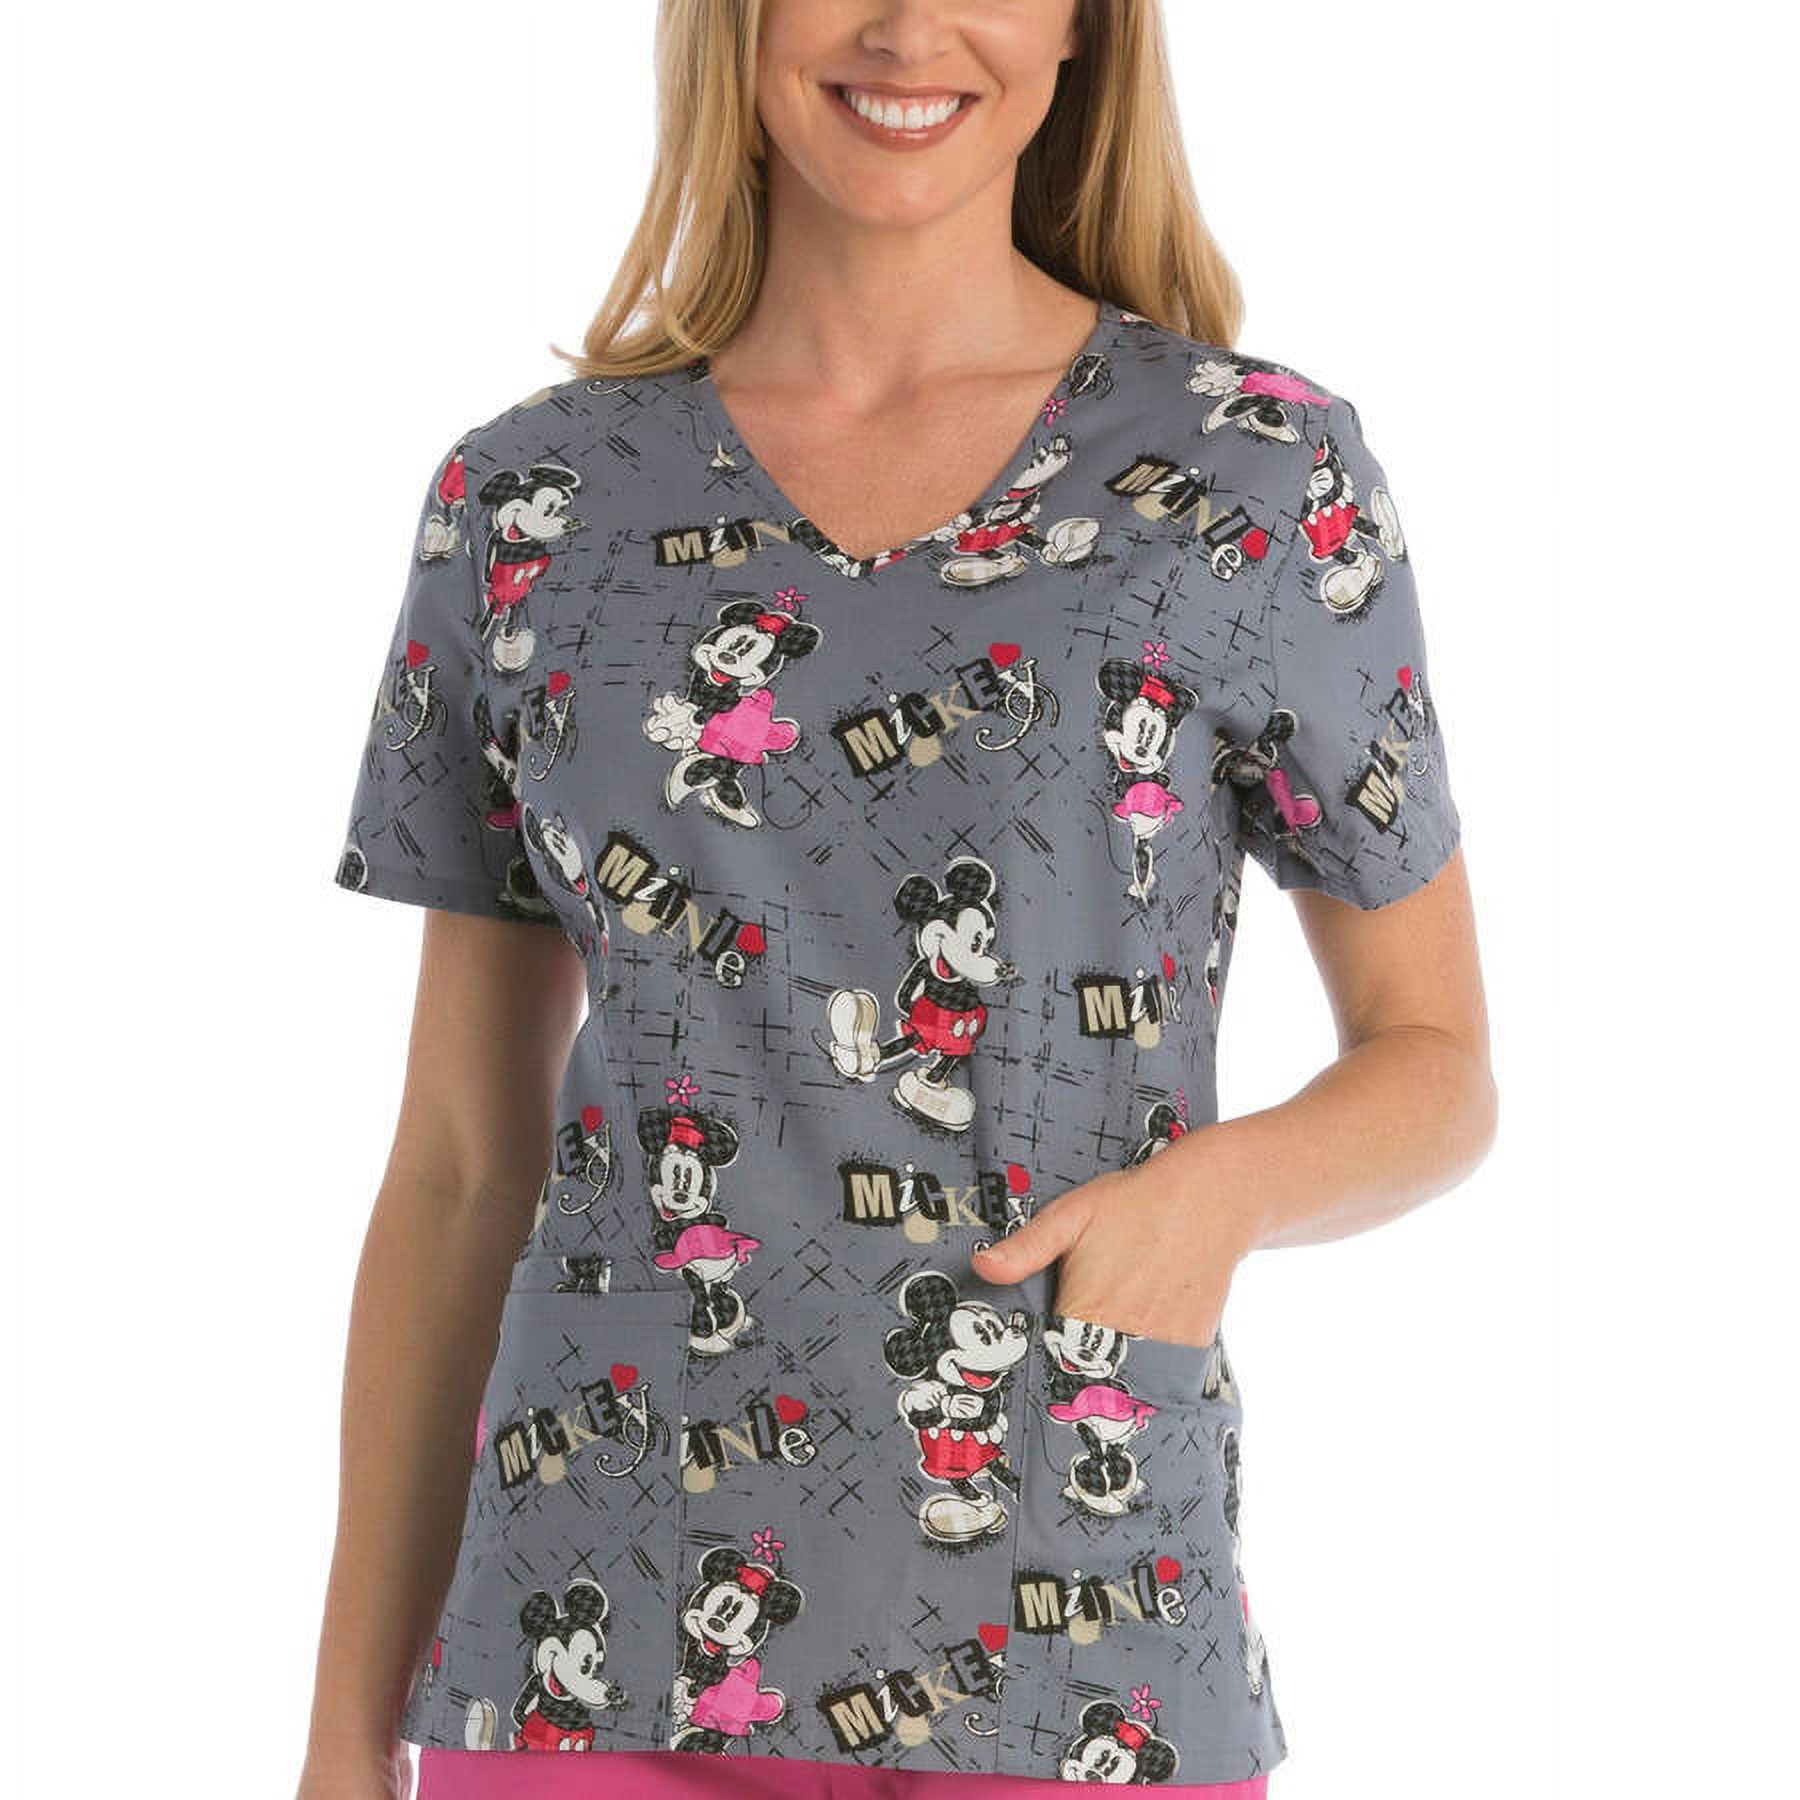 Disney's Plaid About Mickey Printed V-Neck Scrub Top - image 1 of 1